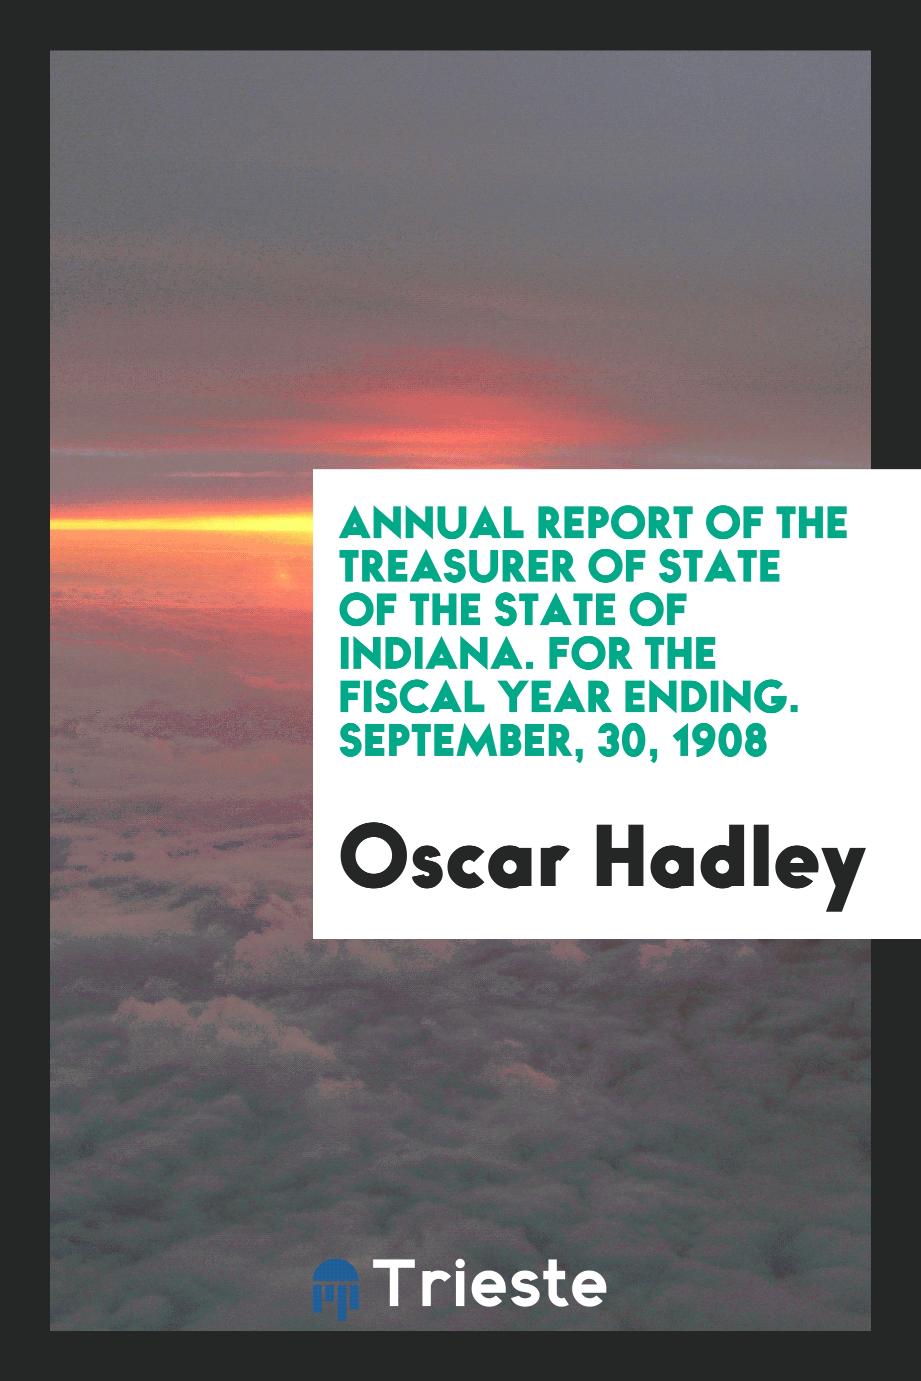 Annual report of the treasurer of state of the state of Indiana. For the fiscal year ending. September, 30, 1908